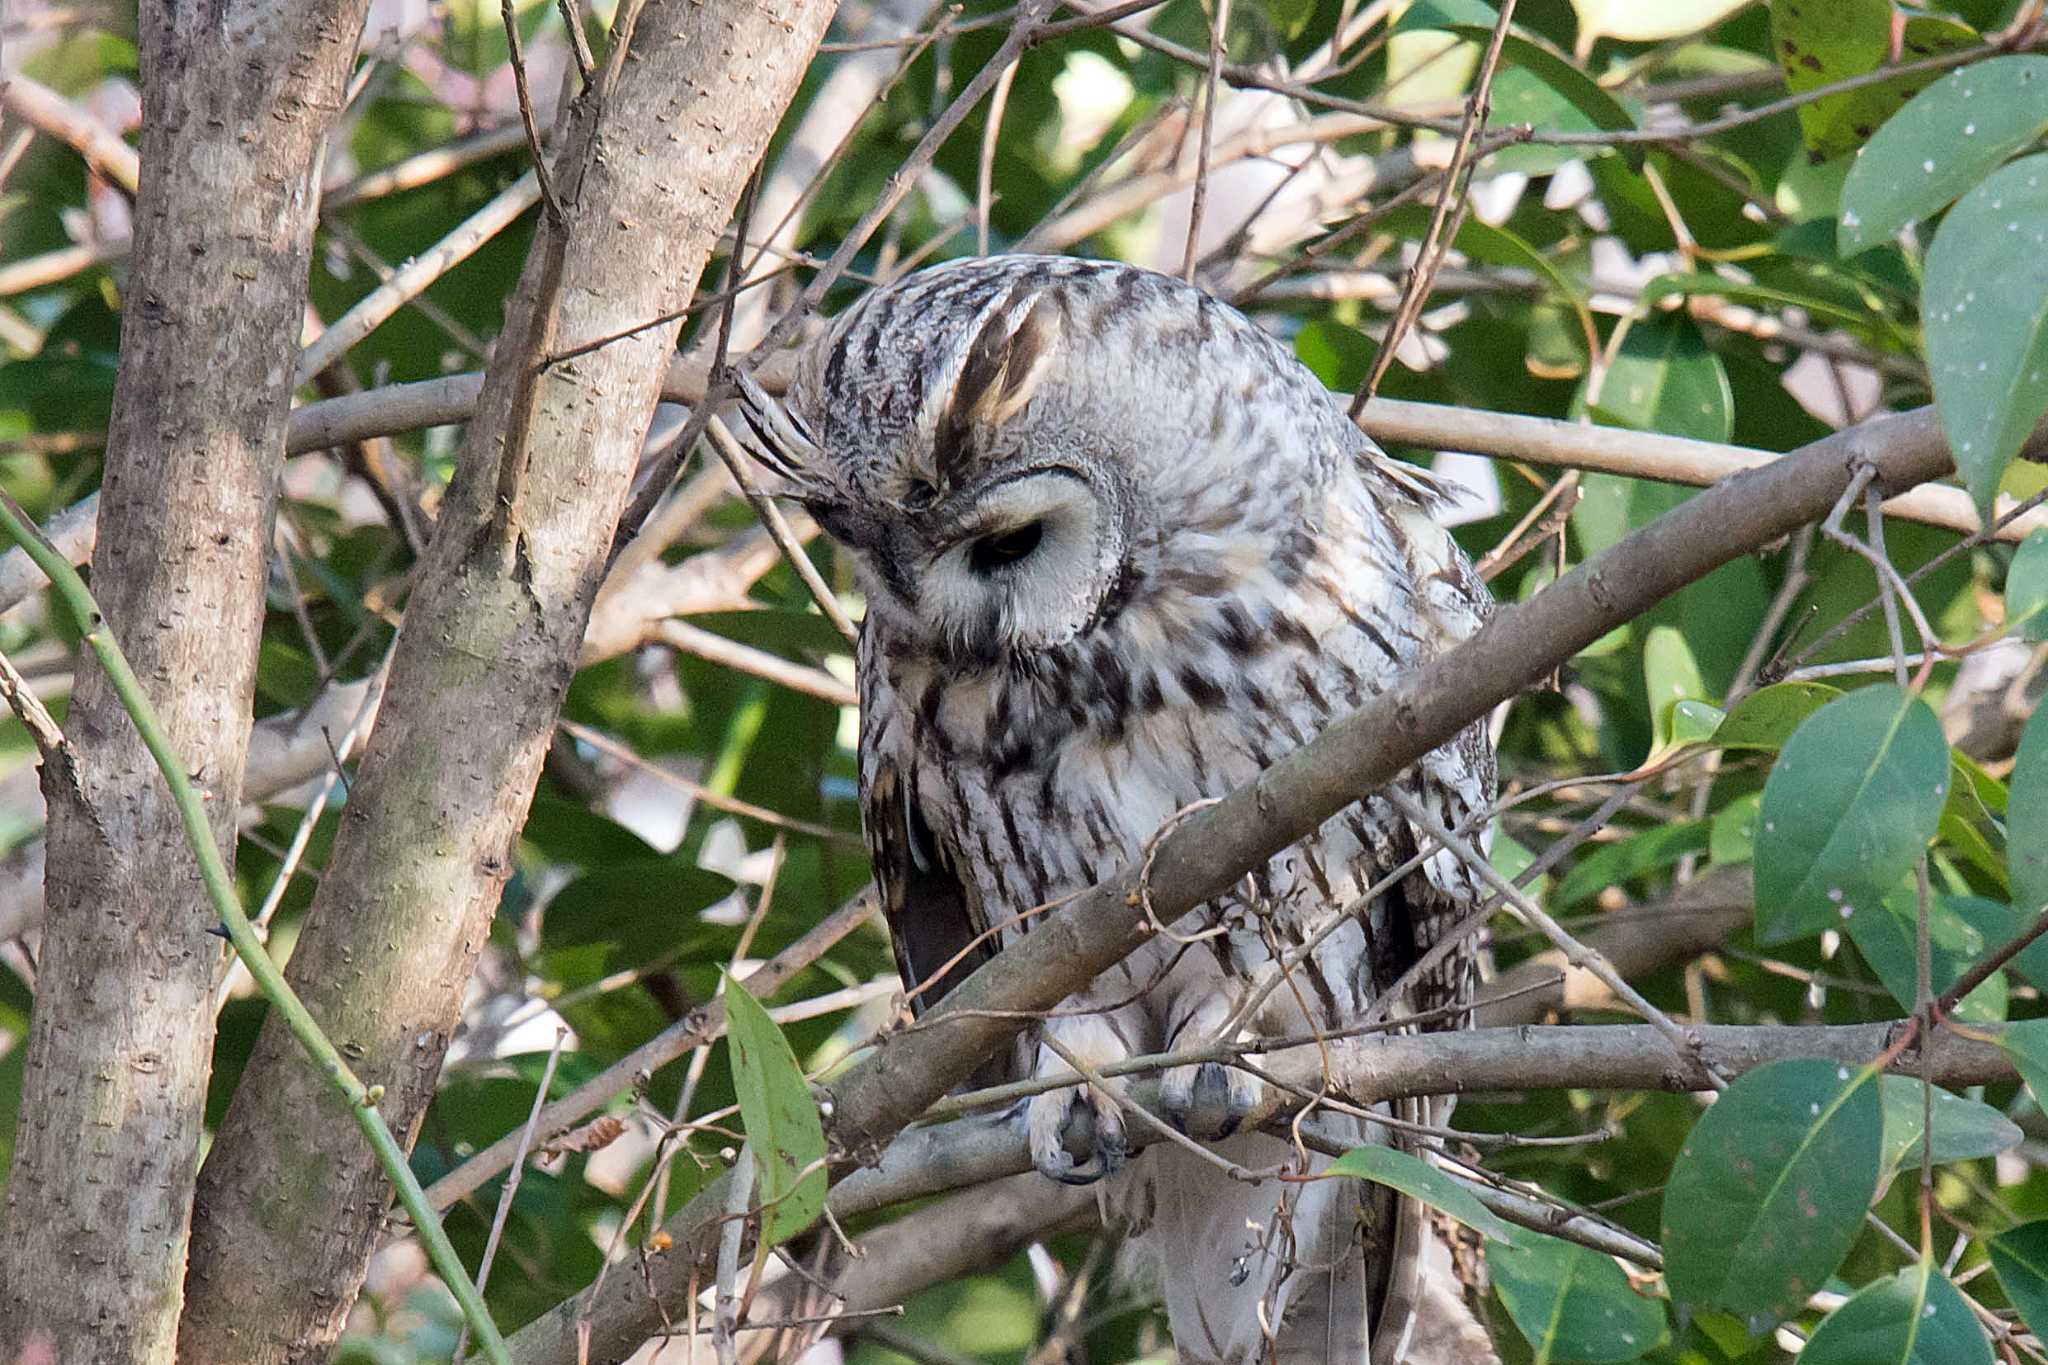 Photo of Long-eared Owl at 大阪淀川 by Tanago Gaia (ichimonji)